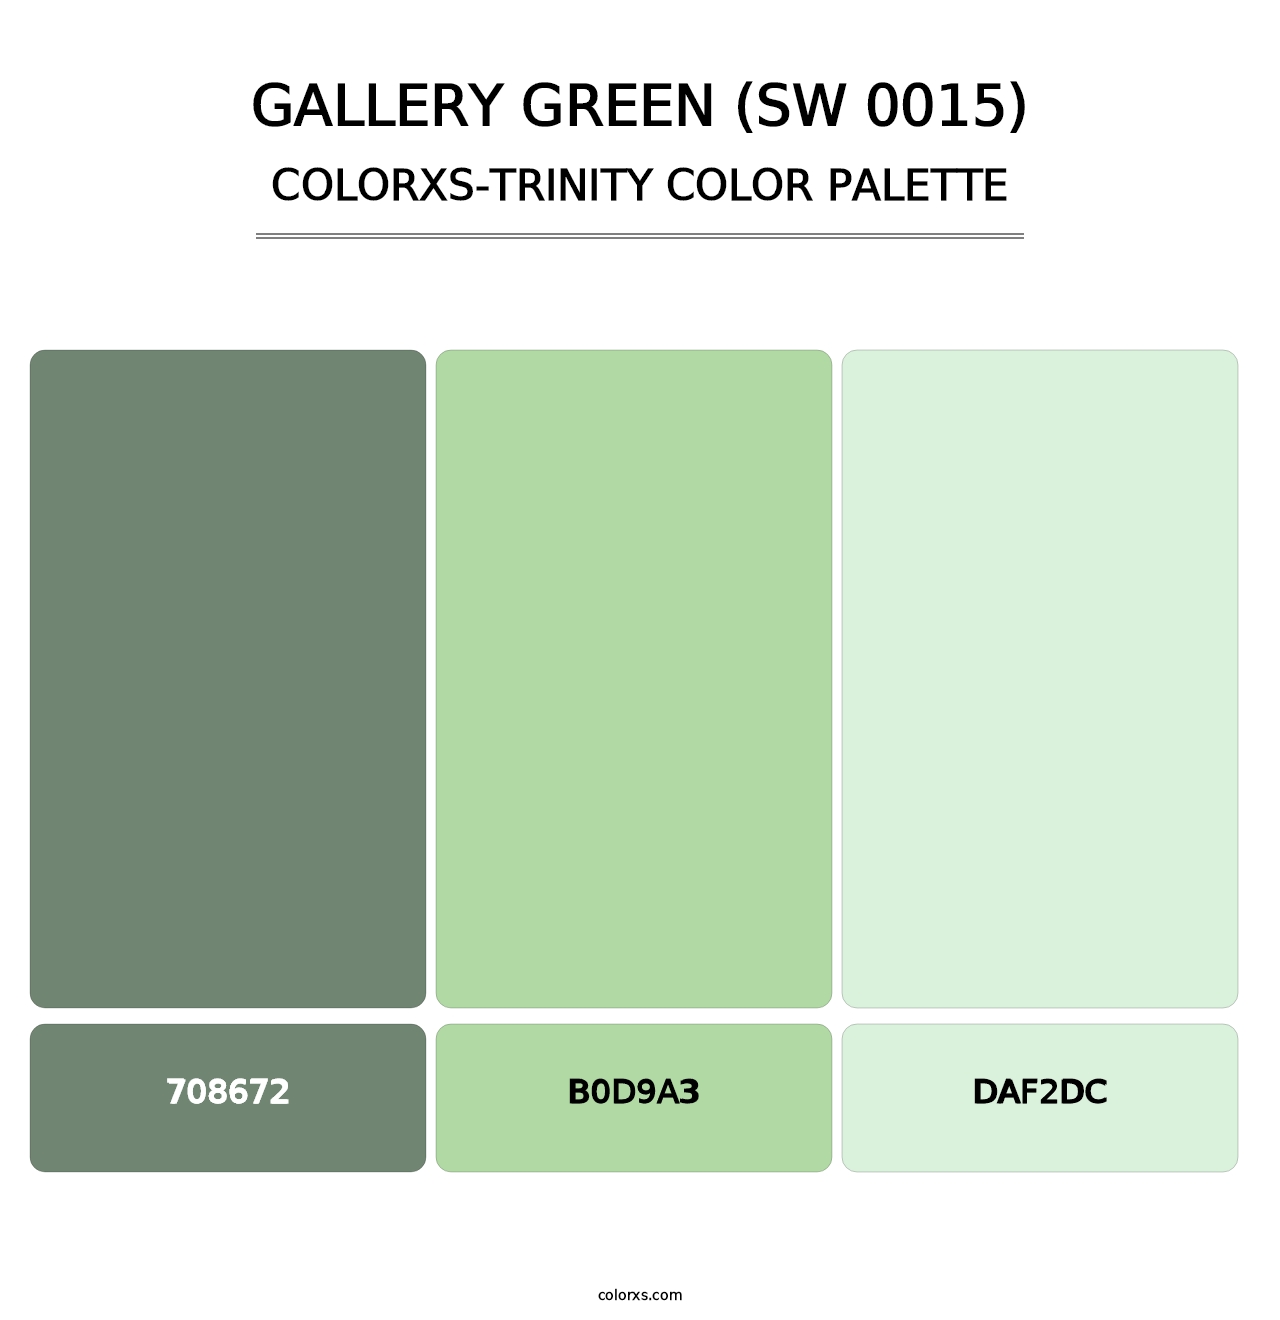 Gallery Green (SW 0015) - Colorxs Trinity Palette